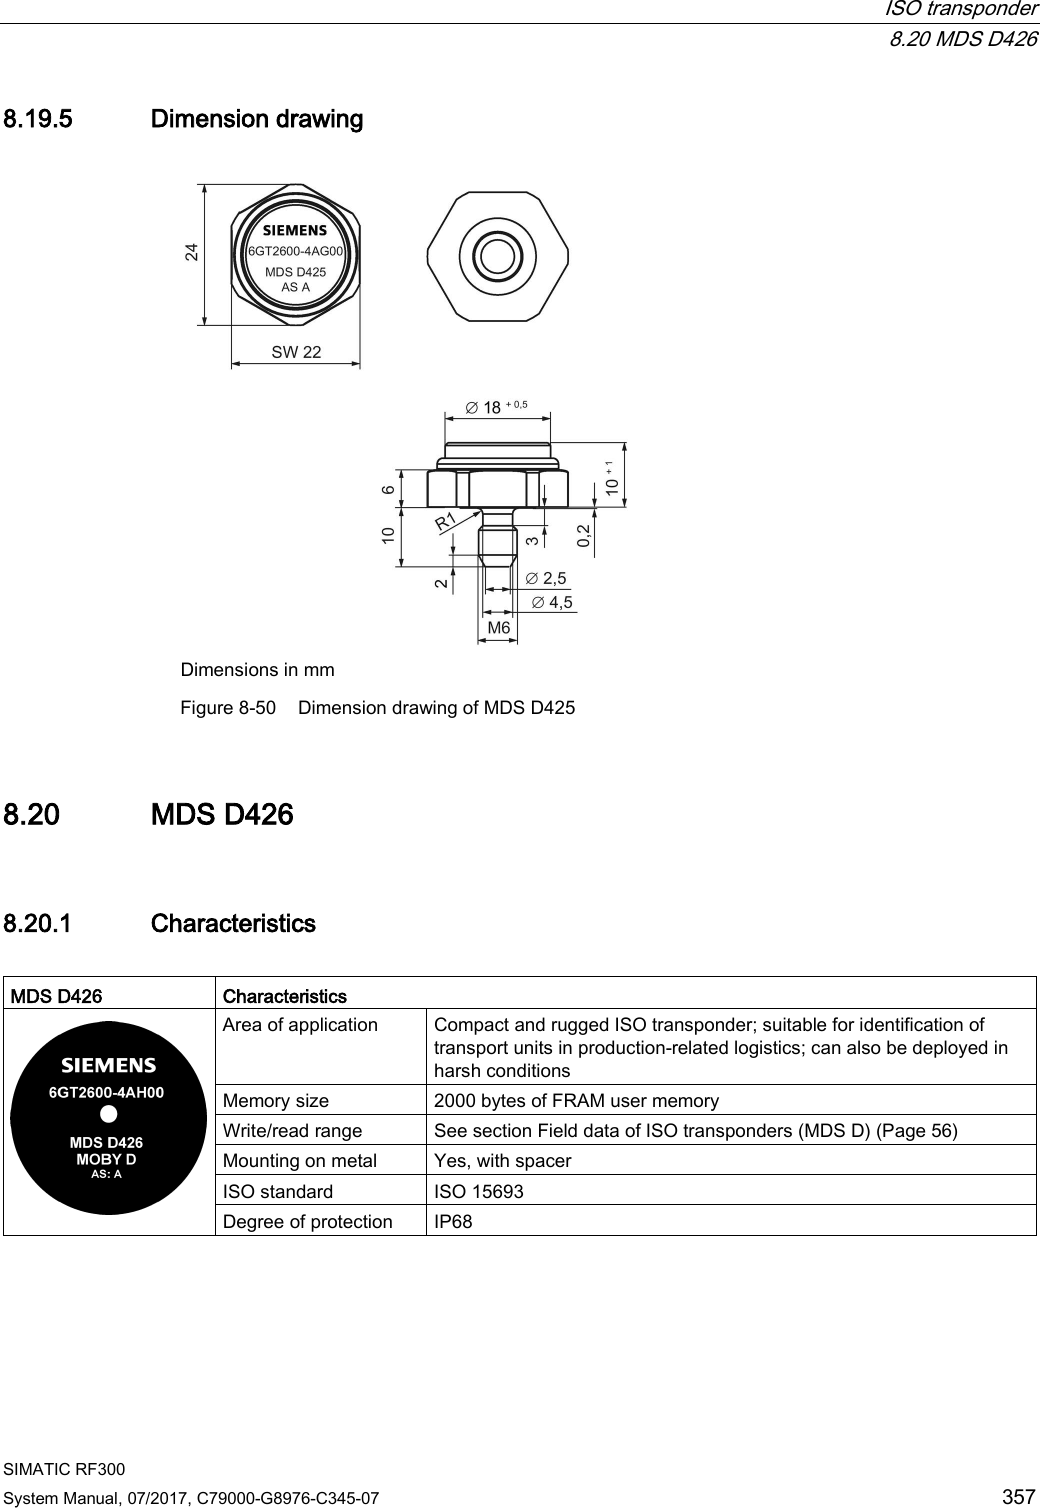  ISO transponder  8.20 MDS D426 SIMATIC RF300 System Manual, 07/2017, C79000-G8976-C345-07 357 8.19.5 Dimension drawing  Dimensions in mm Figure 8-50 Dimension drawing of MDS D425 8.20 MDS D426 8.20.1 Characteristics  MDS D426 Characteristics  Area of application Compact and rugged ISO transponder; suitable for identification of transport units in production-related logistics; can also be deployed in harsh conditions Memory size 2000 bytes of FRAM user memory Write/read range See section Field data of ISO transponders (MDS D) (Page 56)   Mounting on metal Yes, with spacer ISO standard ISO 15693 Degree of protection IP68   